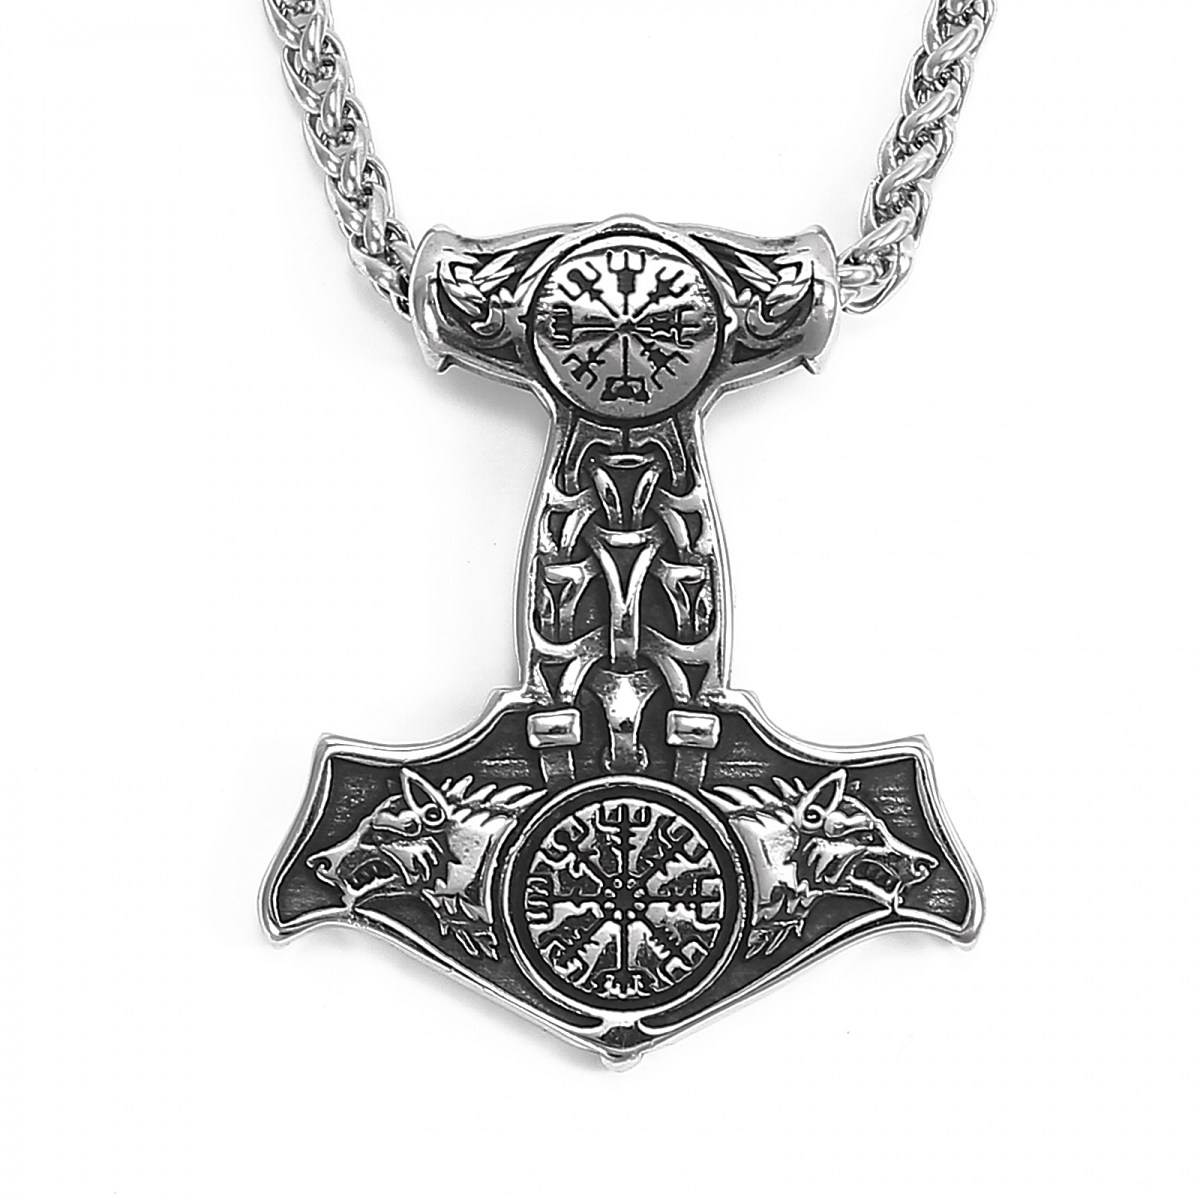 Wolf Hammer Necklace US$2.9/PC-NORSECOLLECTION- Viking Jewelry,Viking Necklace,Viking Bracelet,Viking Rings,Viking Mugs,Viking Accessories,Viking Crafts